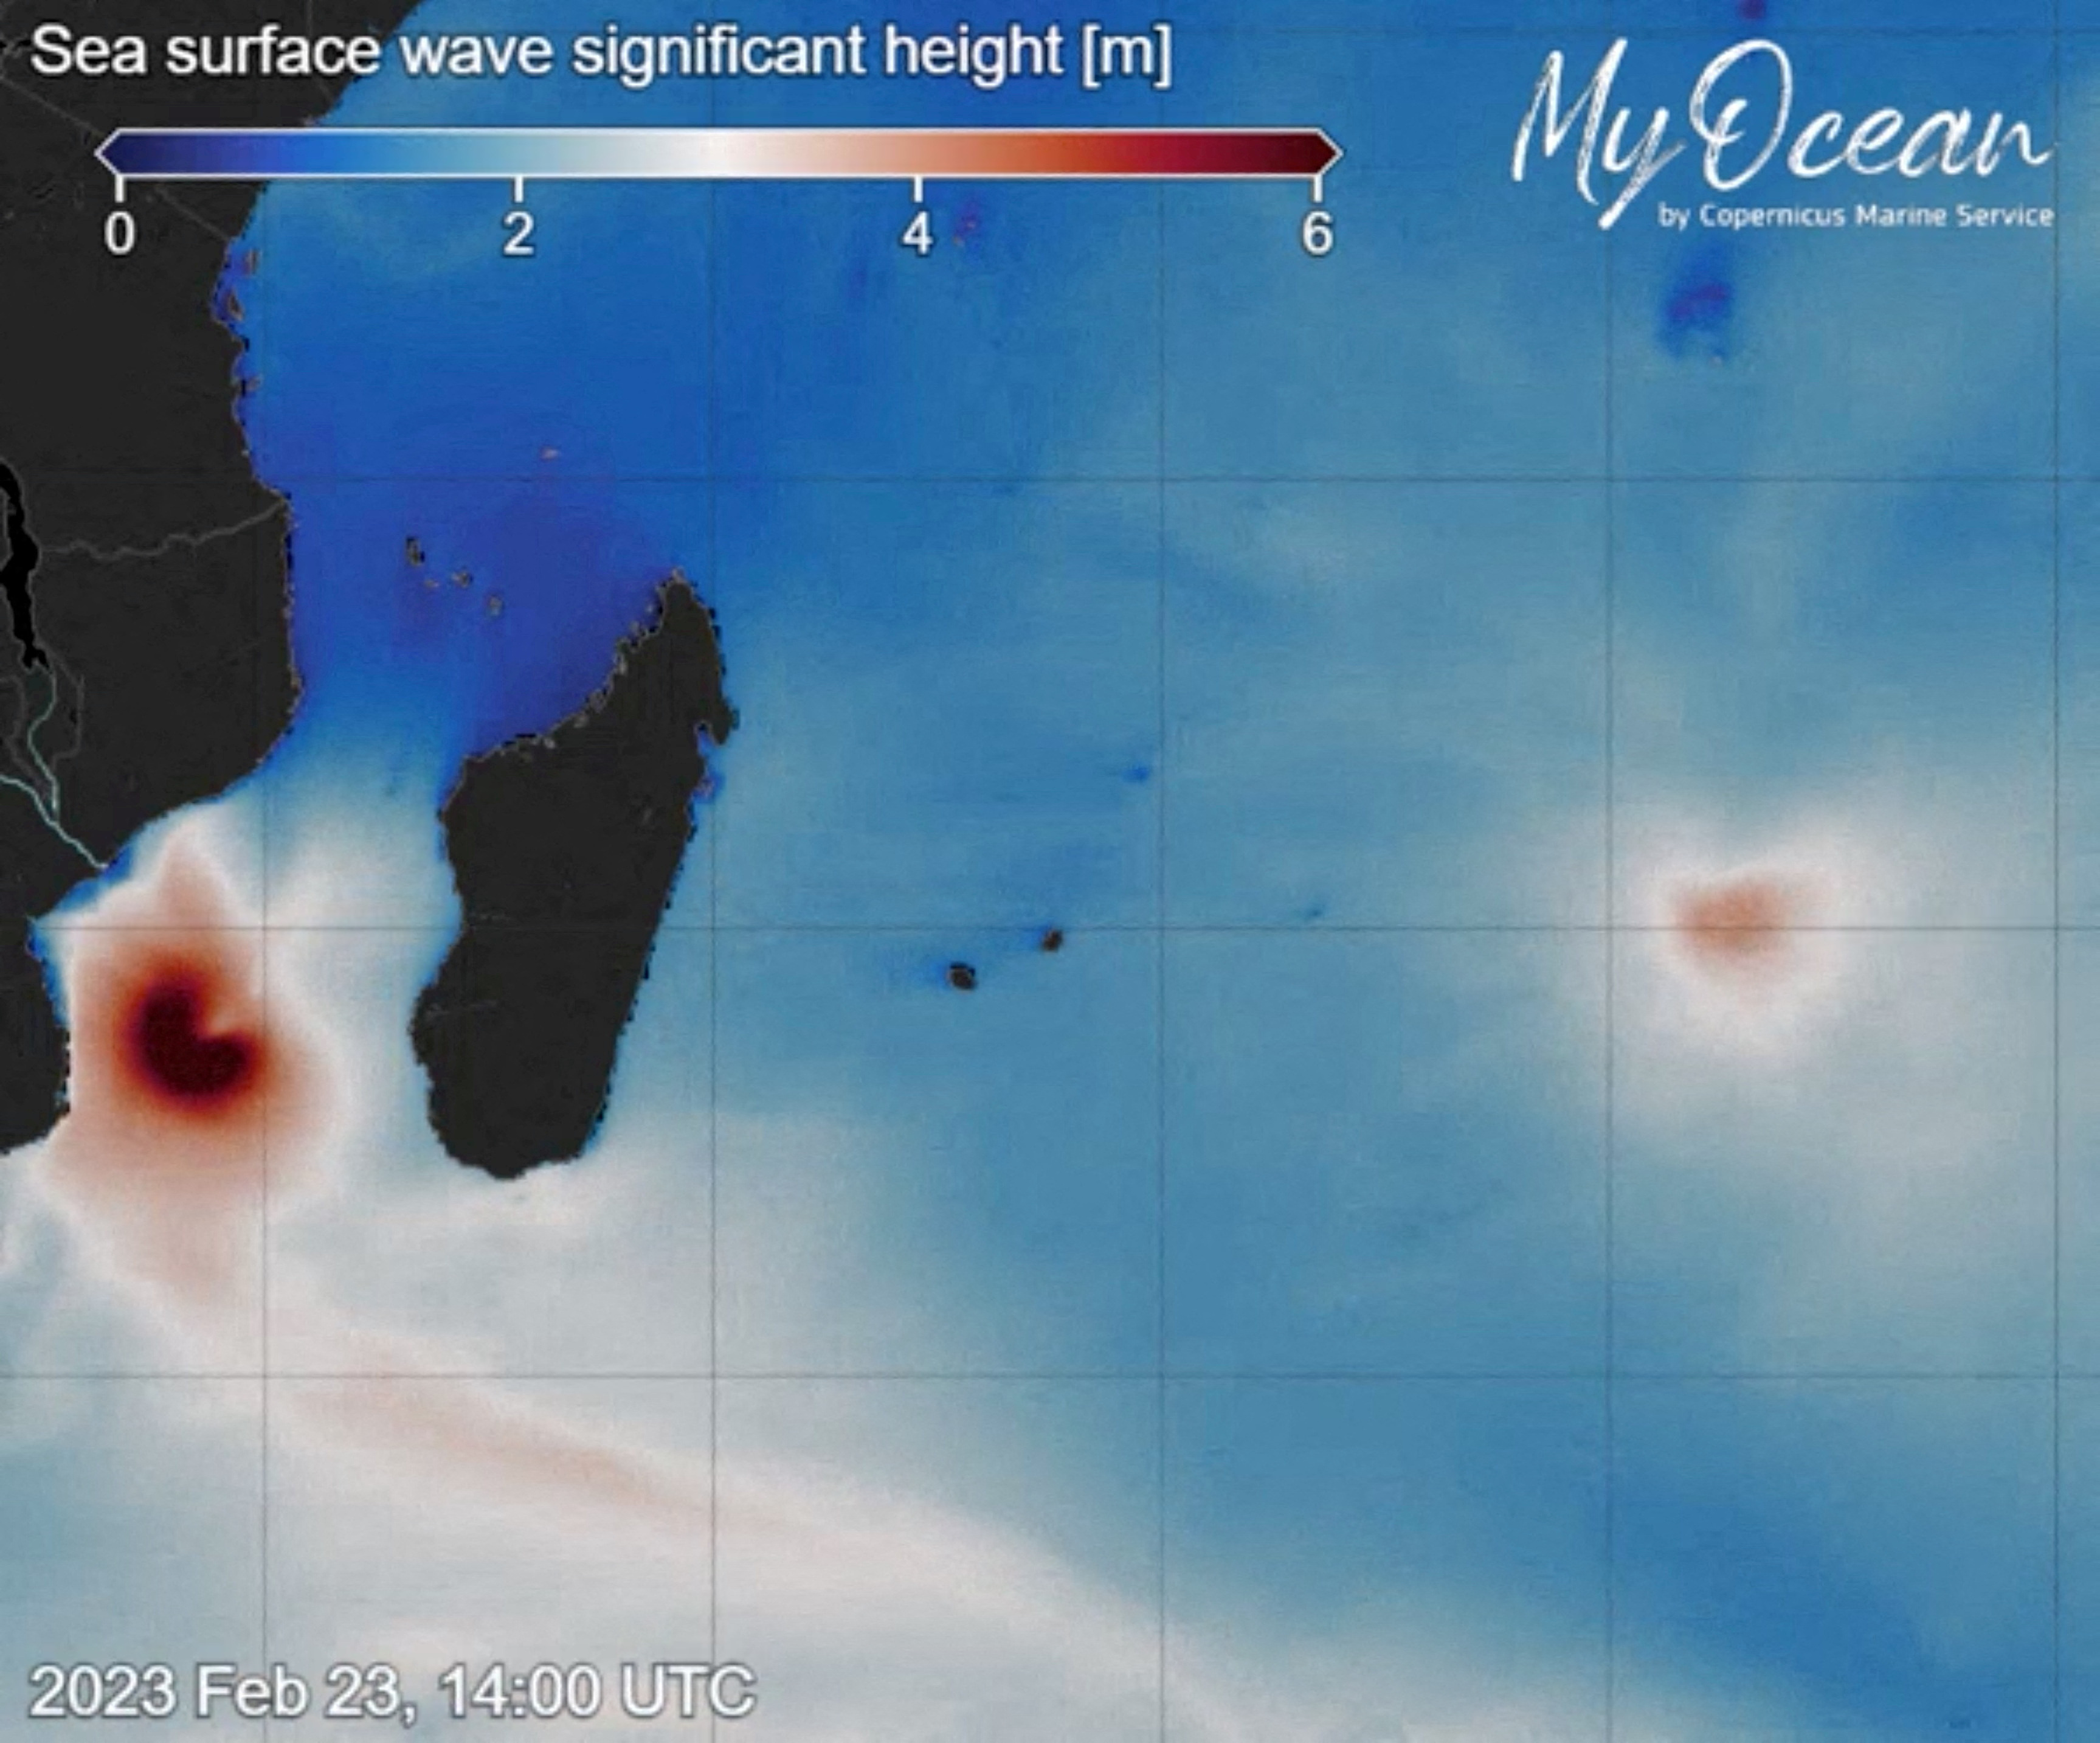 Animation of the height of sea waves produced from Cyclone FreddyÕs path through the Indian ocean